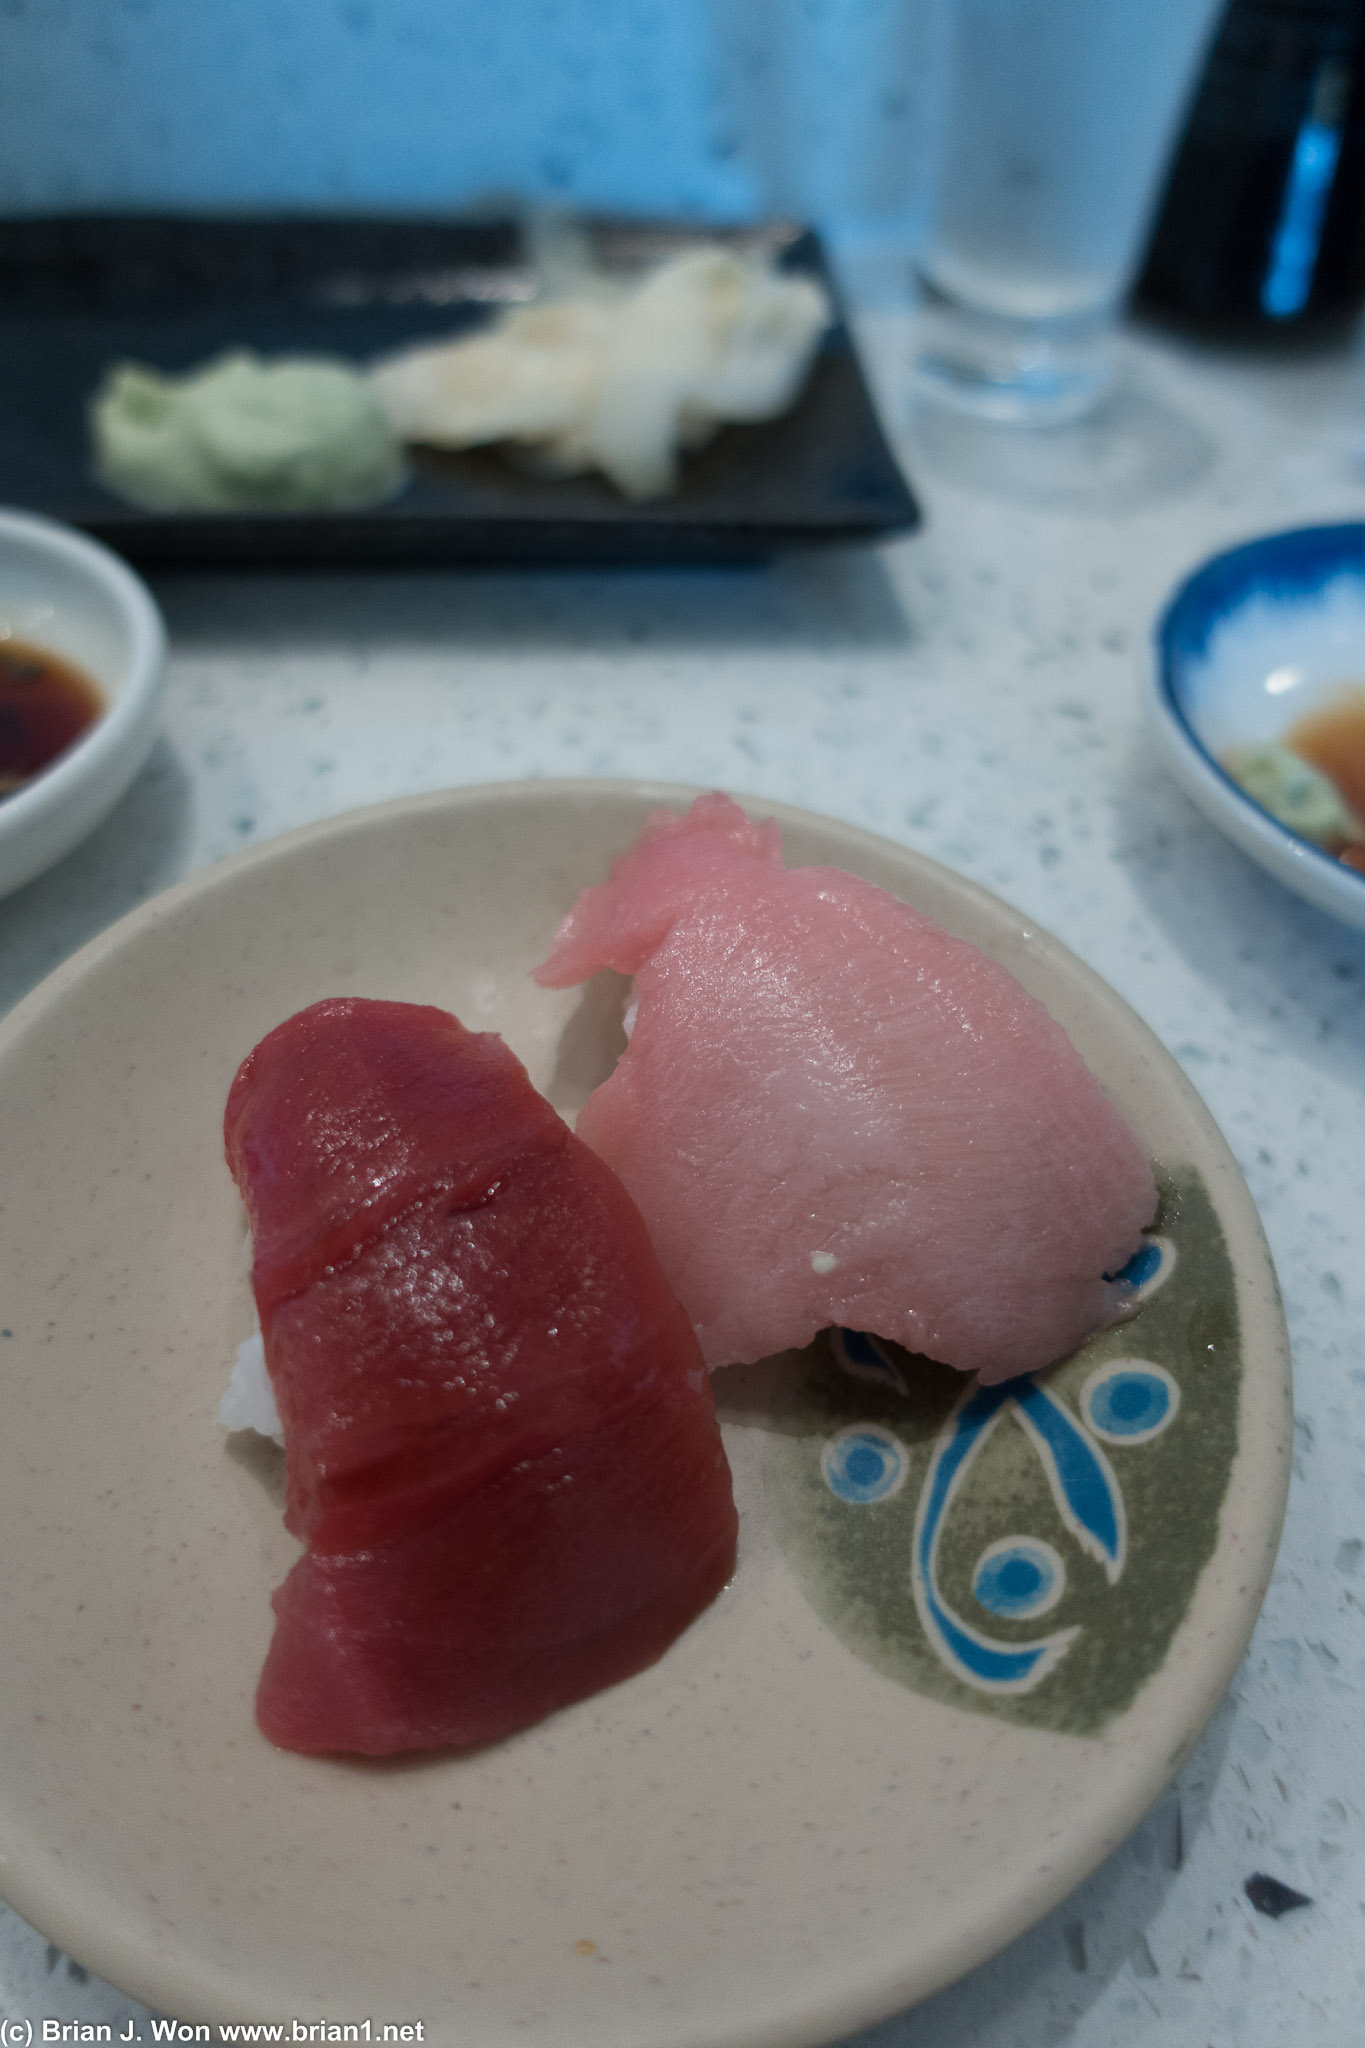 Toro and bluefin tuna. Good but a little short of the best.